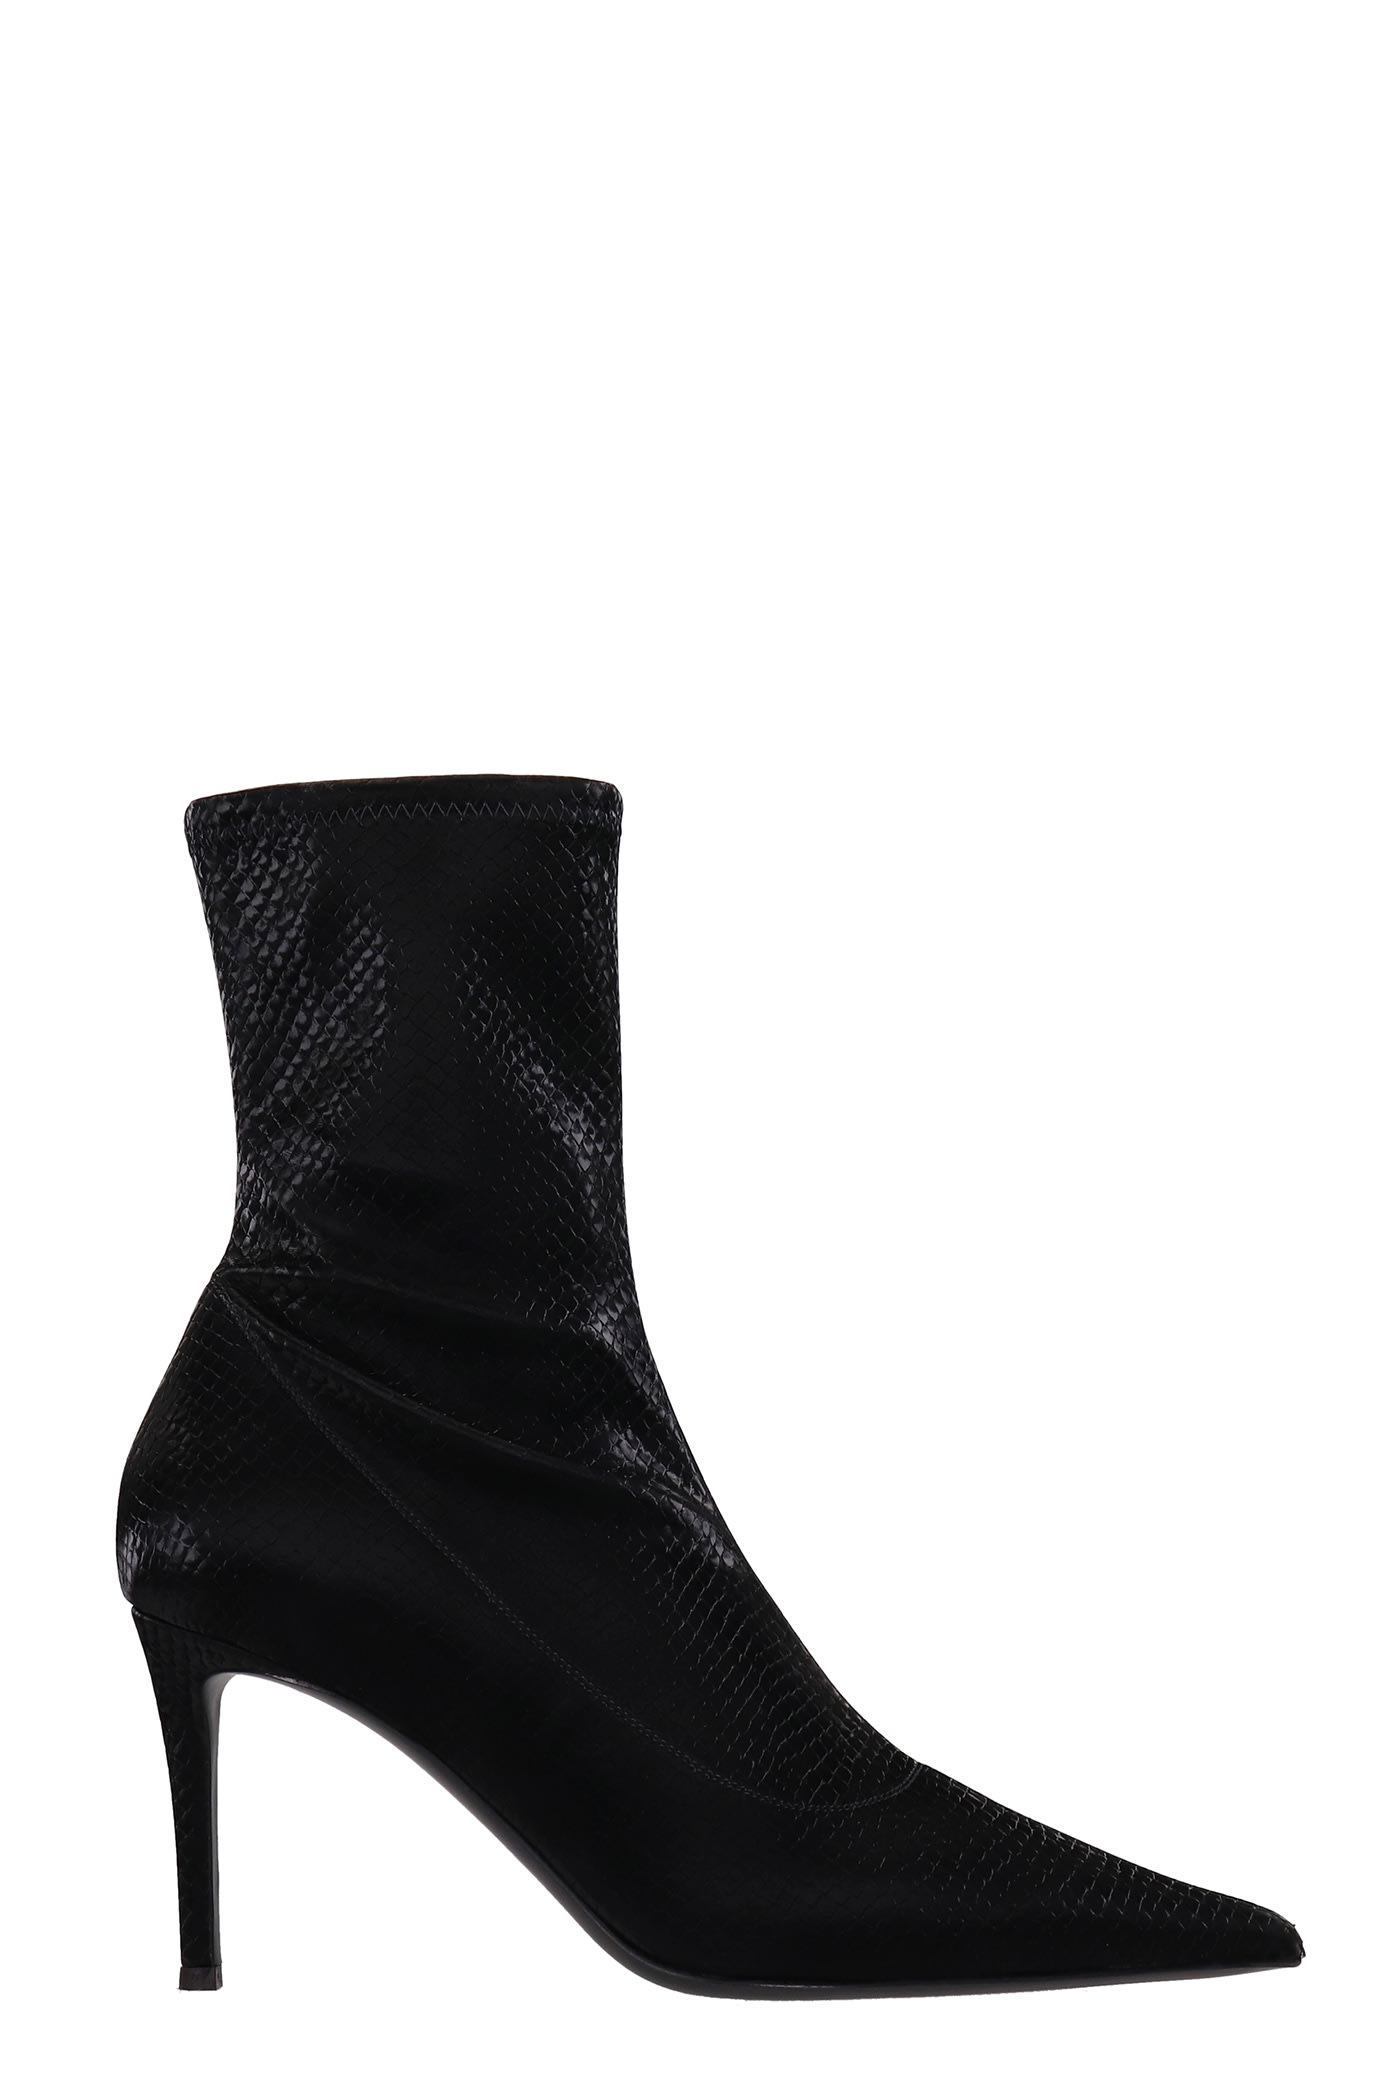 Giuseppe Zanotti Ametista High Heels Ankle Boots In Black Leather